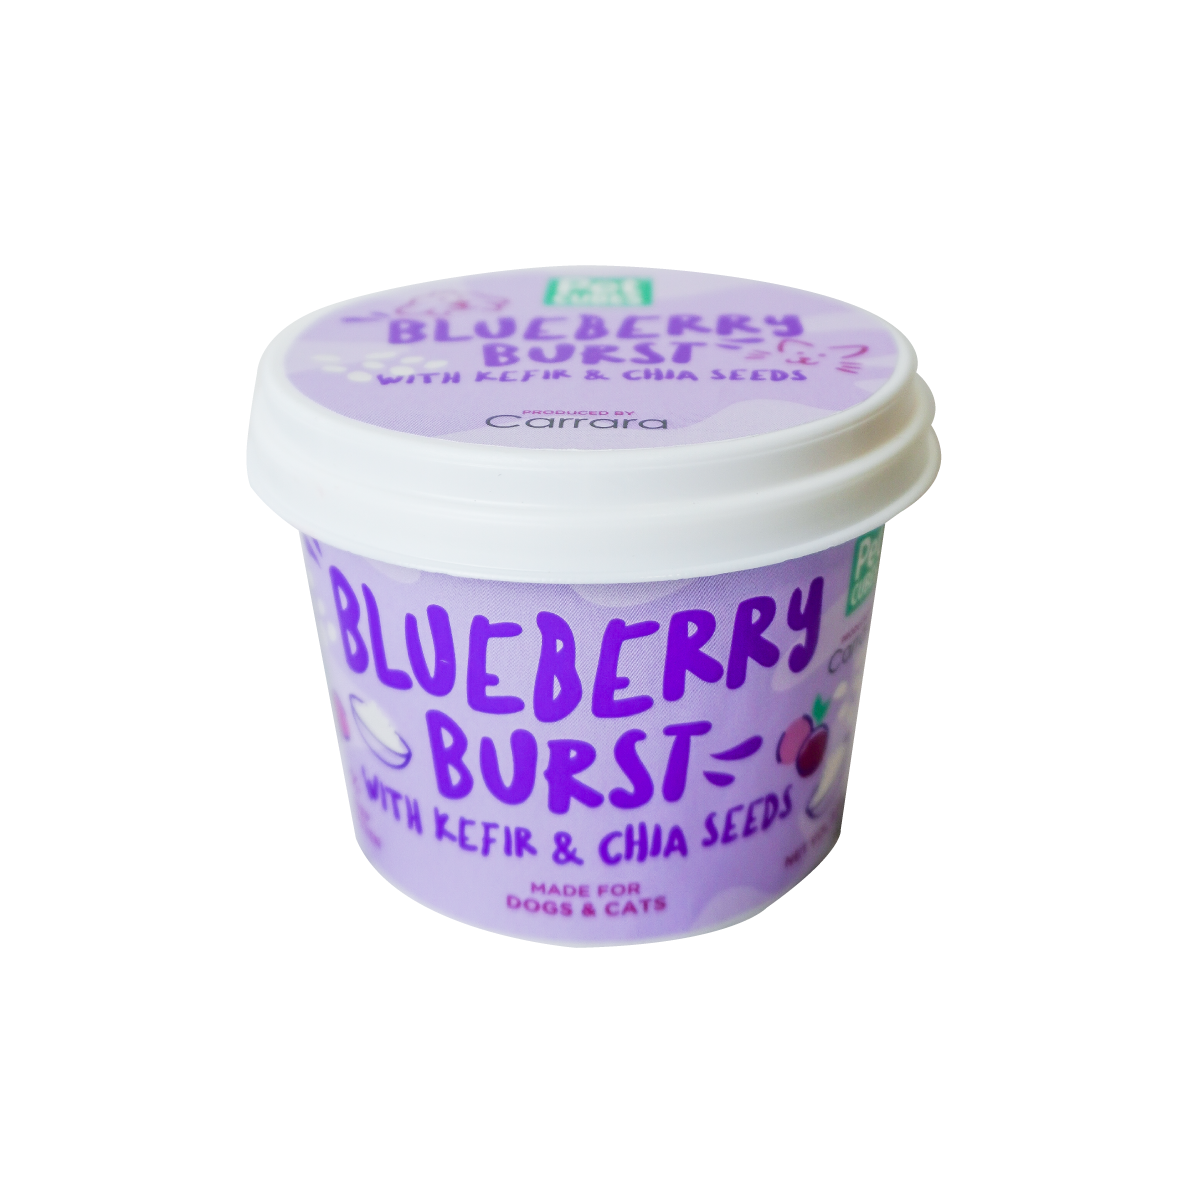 PetCubes Ice Cream for Dogs & Cats - Blueberry Burst with Kefir and Chia Seeds 3.5oz